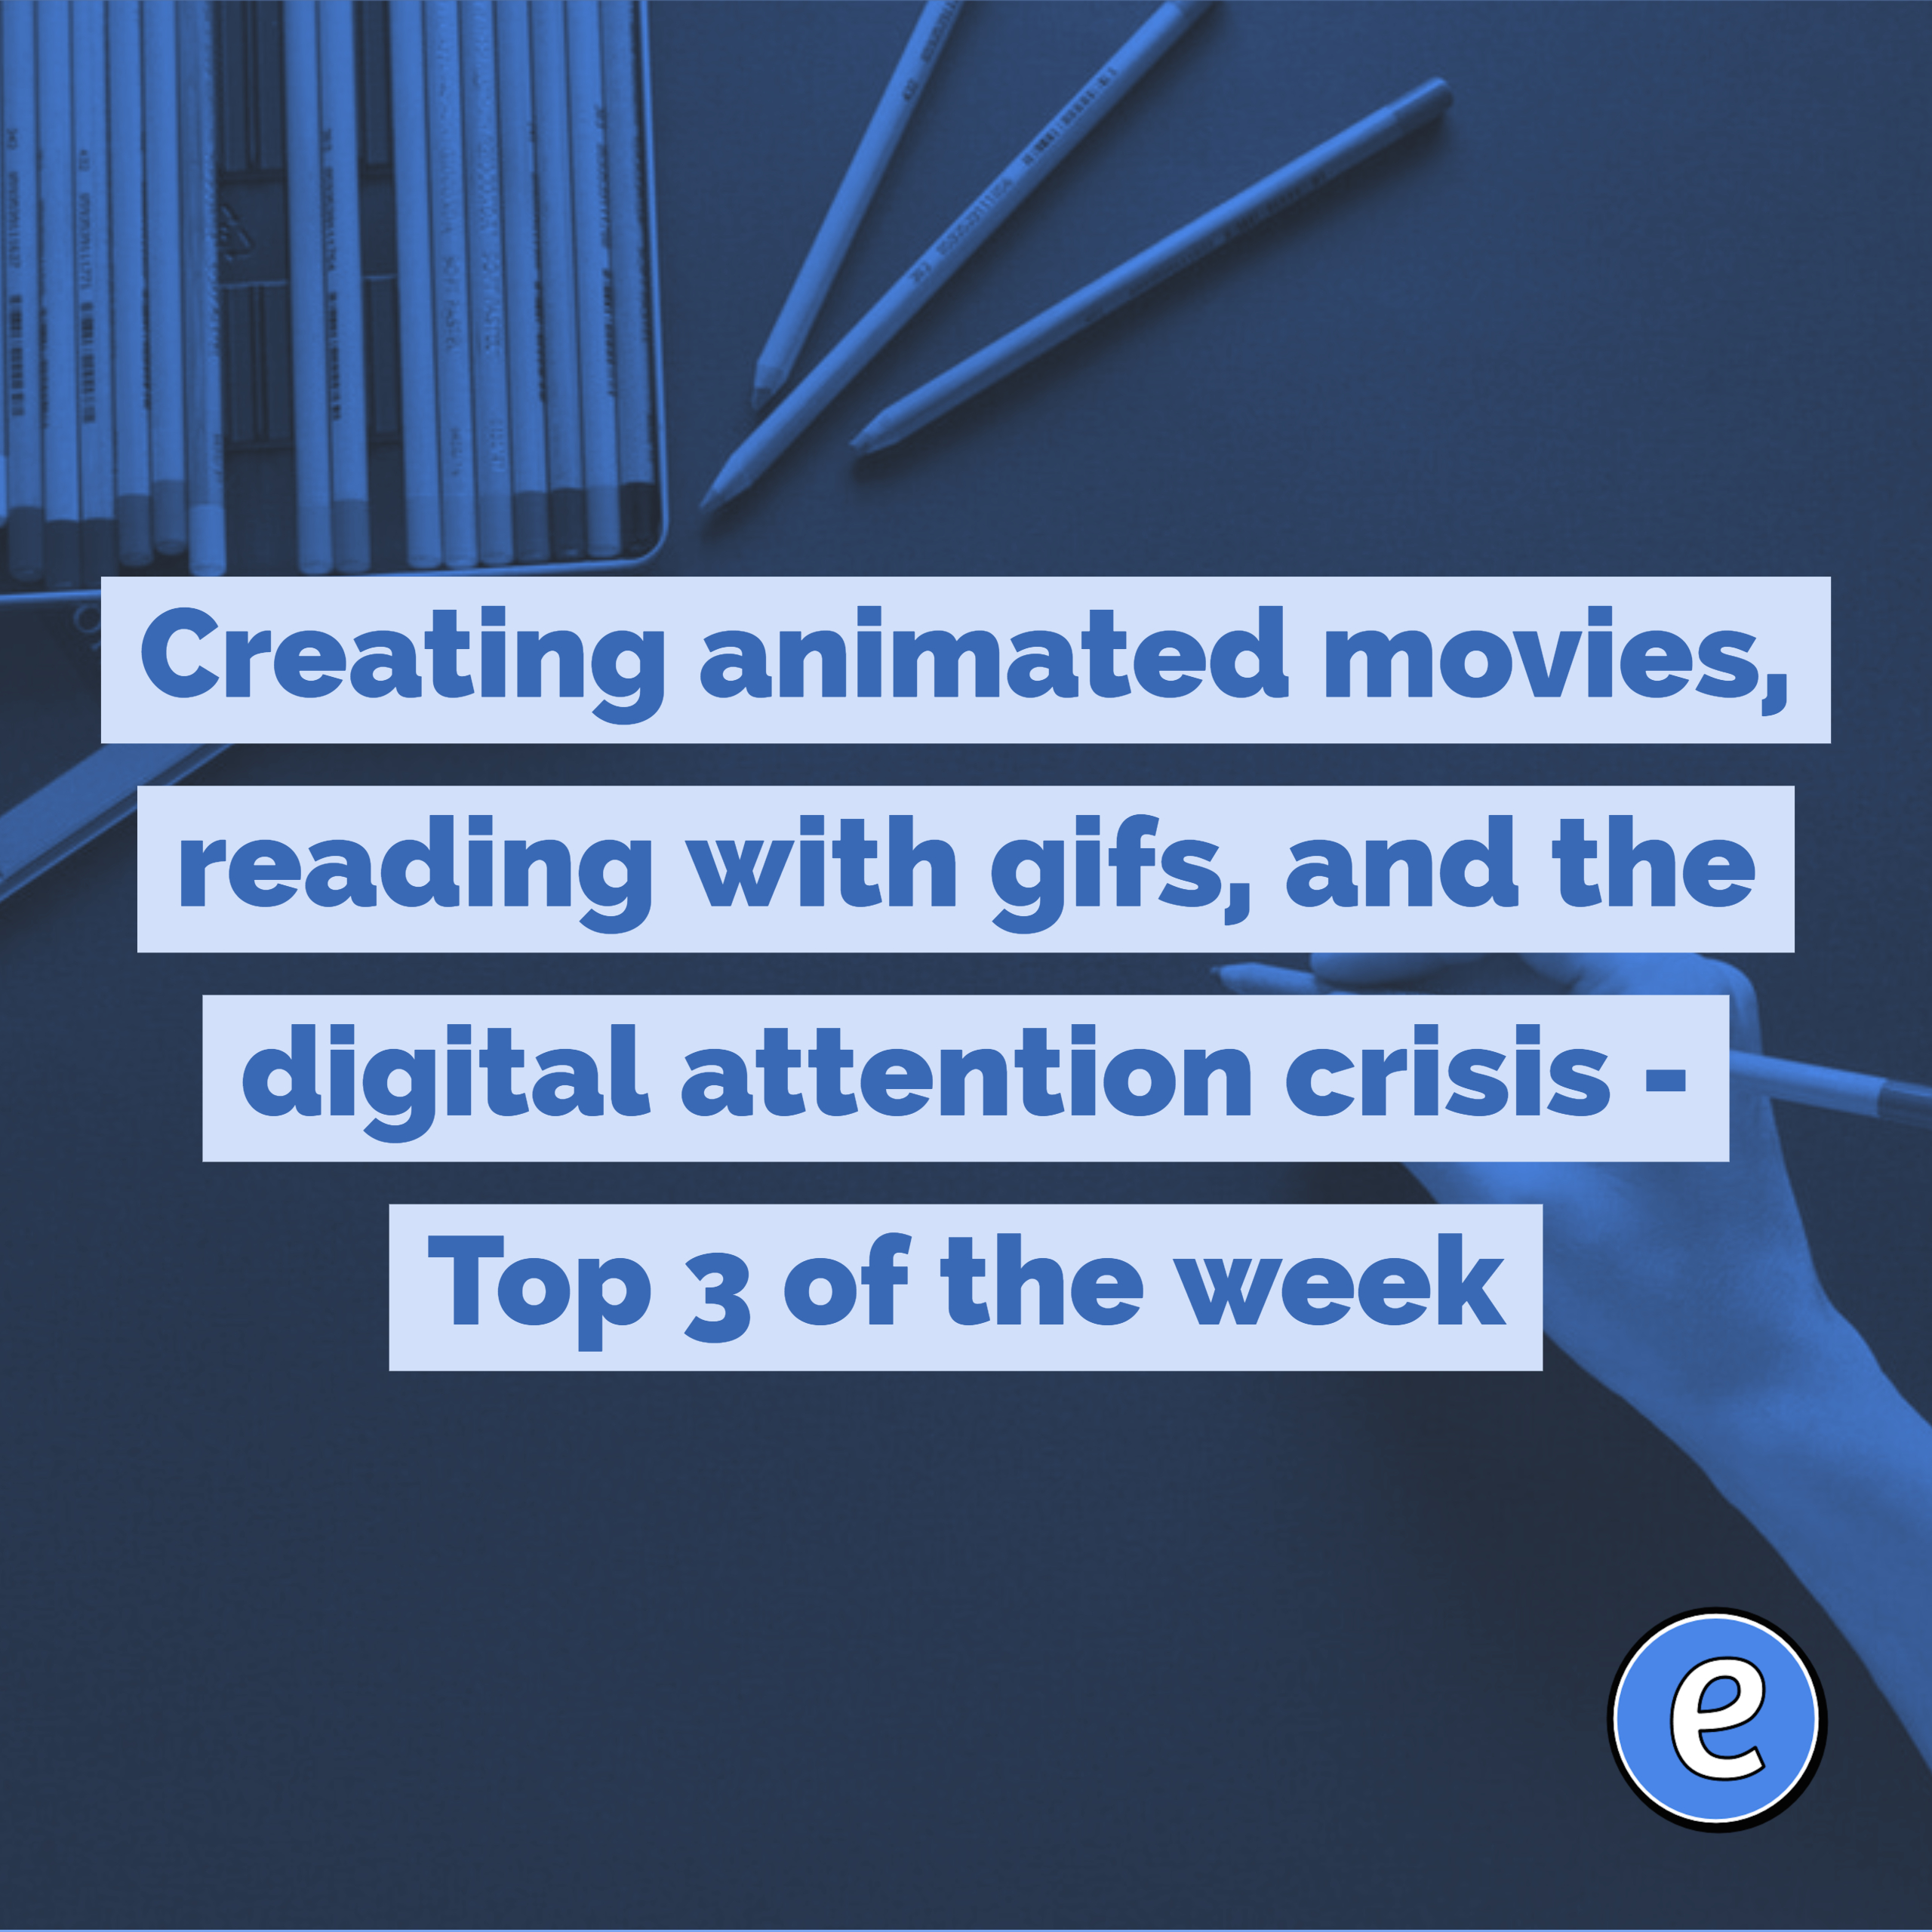 Creating animated movies, reading with gifs, and the digital attention crisis – Top 3 of the week